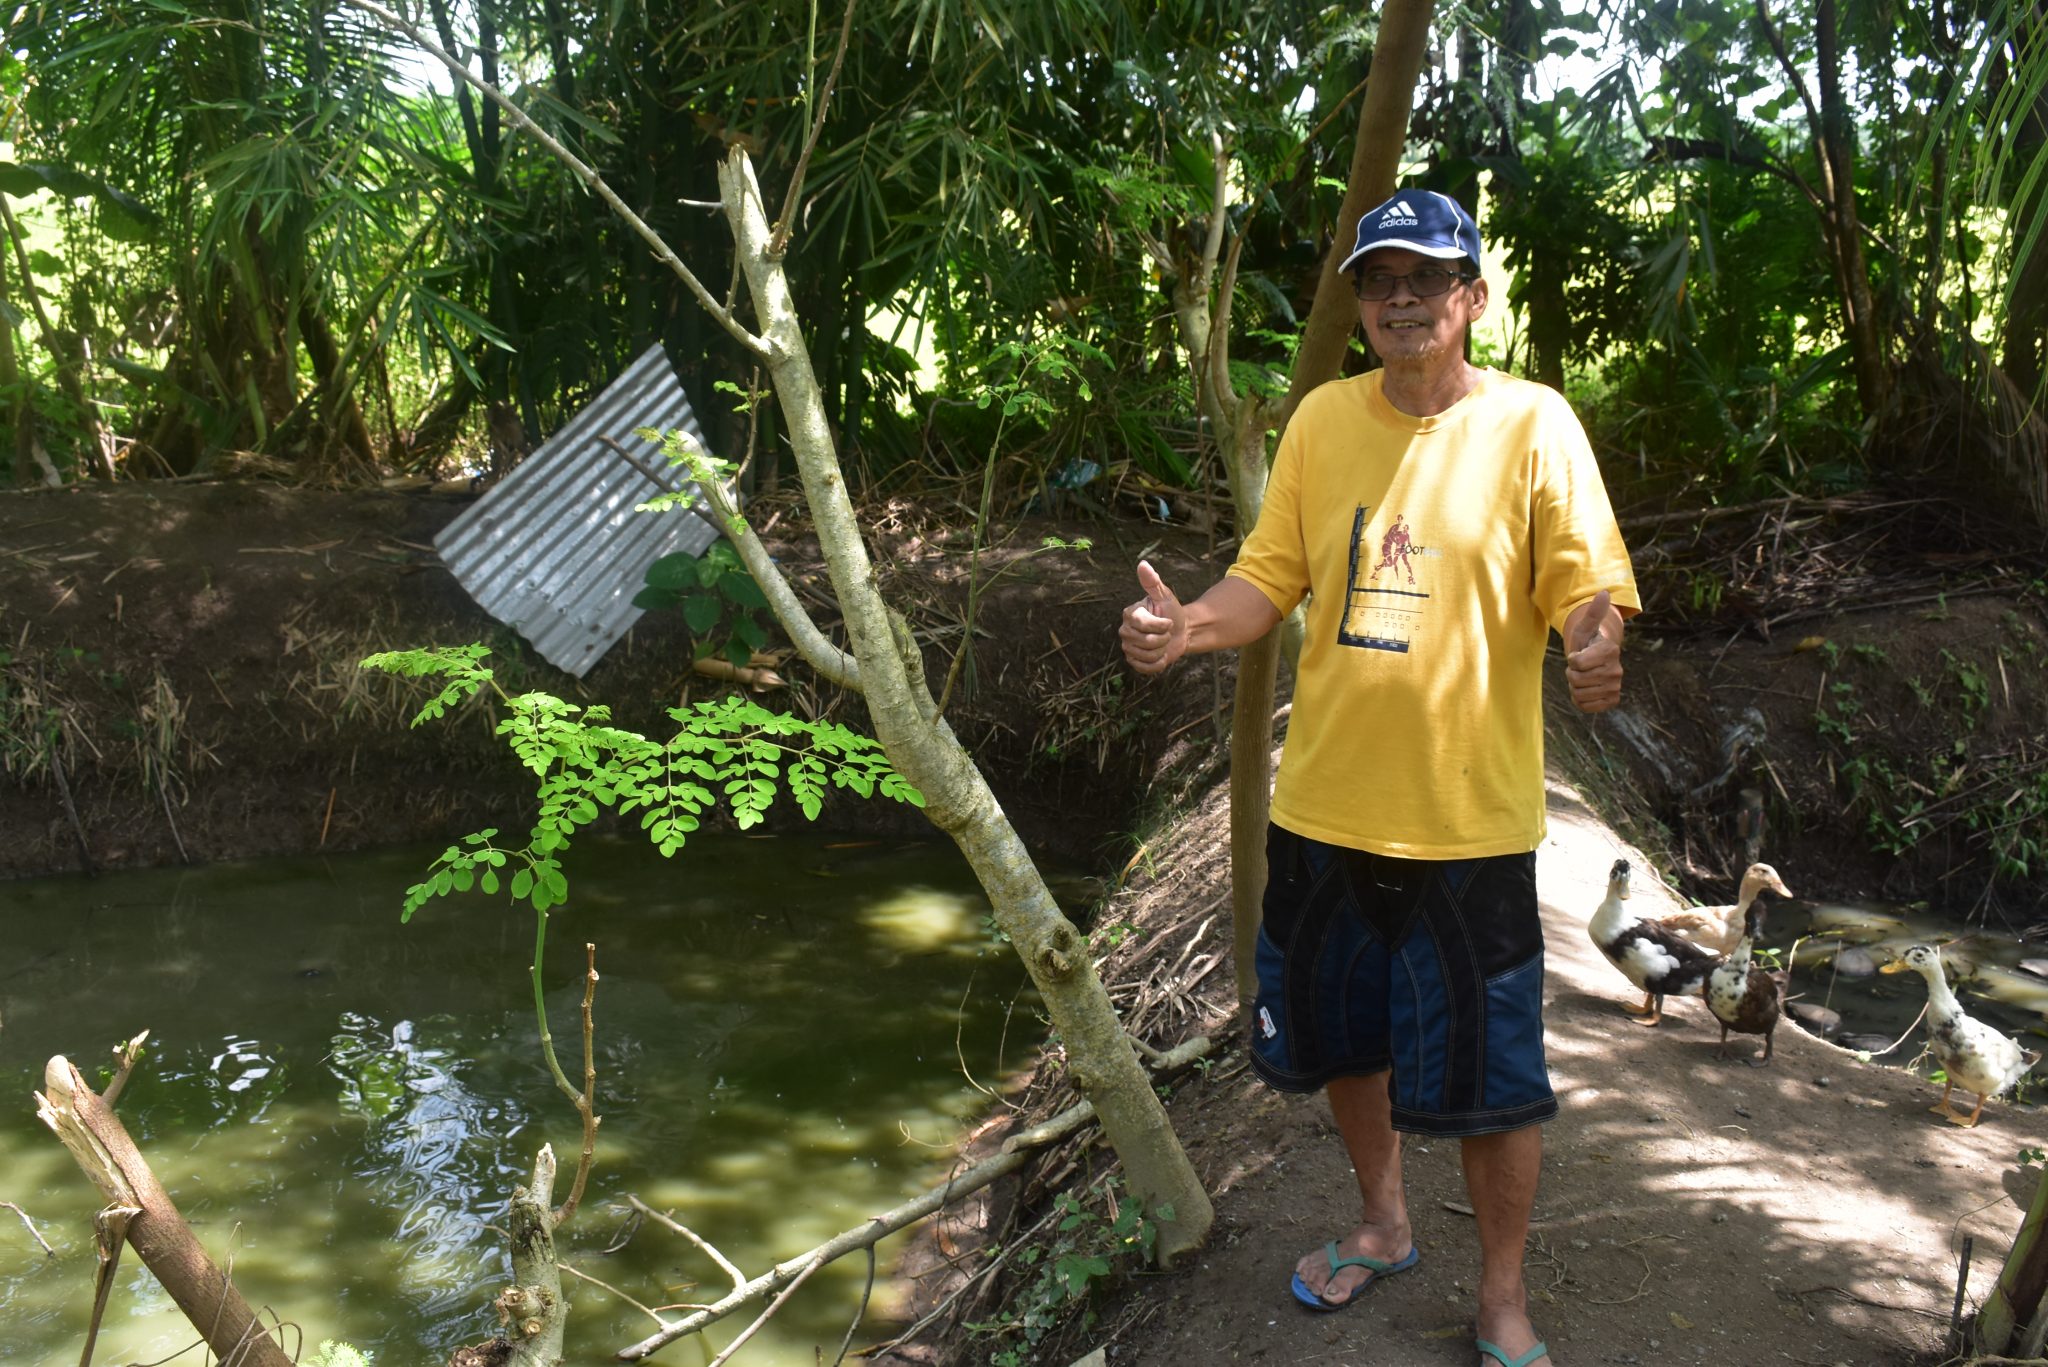 64-year-old farmer in Tacurong City earns Php 510K from hito (catfish) production